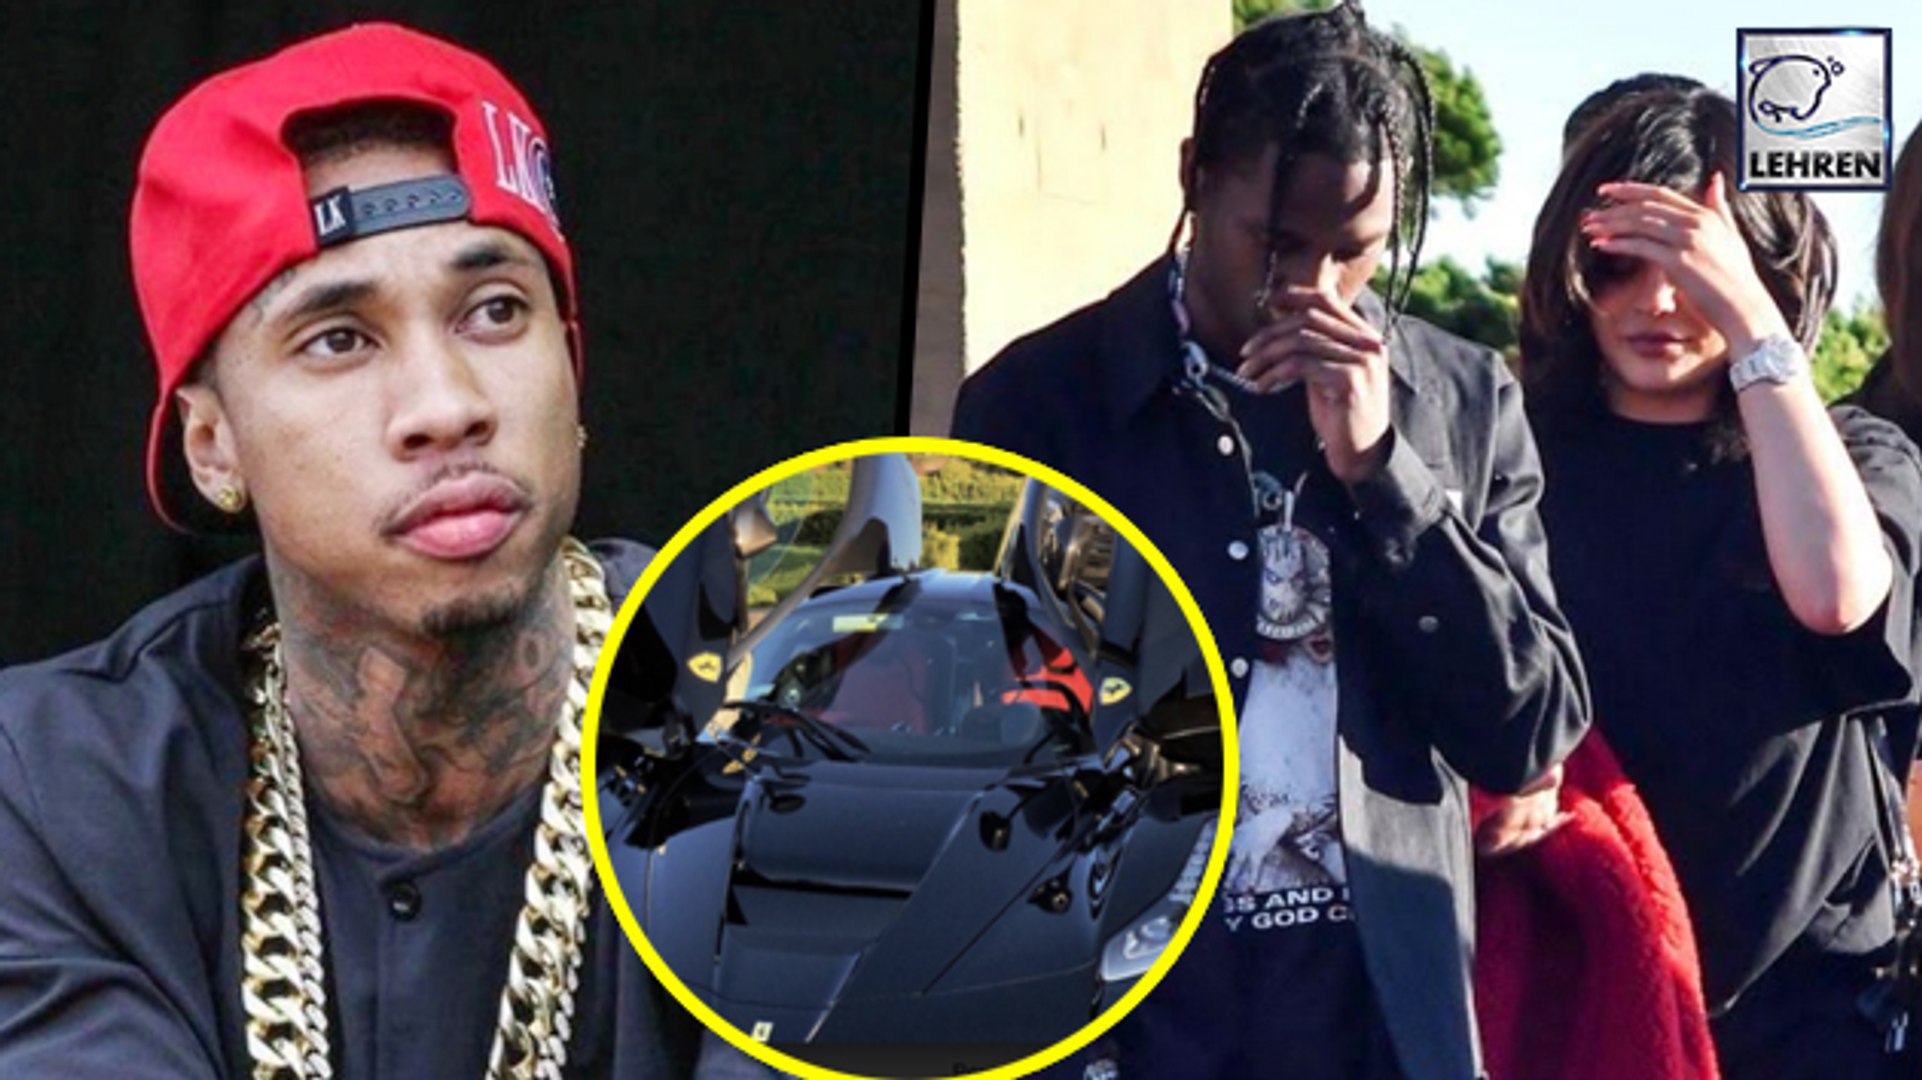 Tyga Thinks That The Ferrari Travis Scott Gave Kylie Jenner Is A ‘Pathetic’ Gift